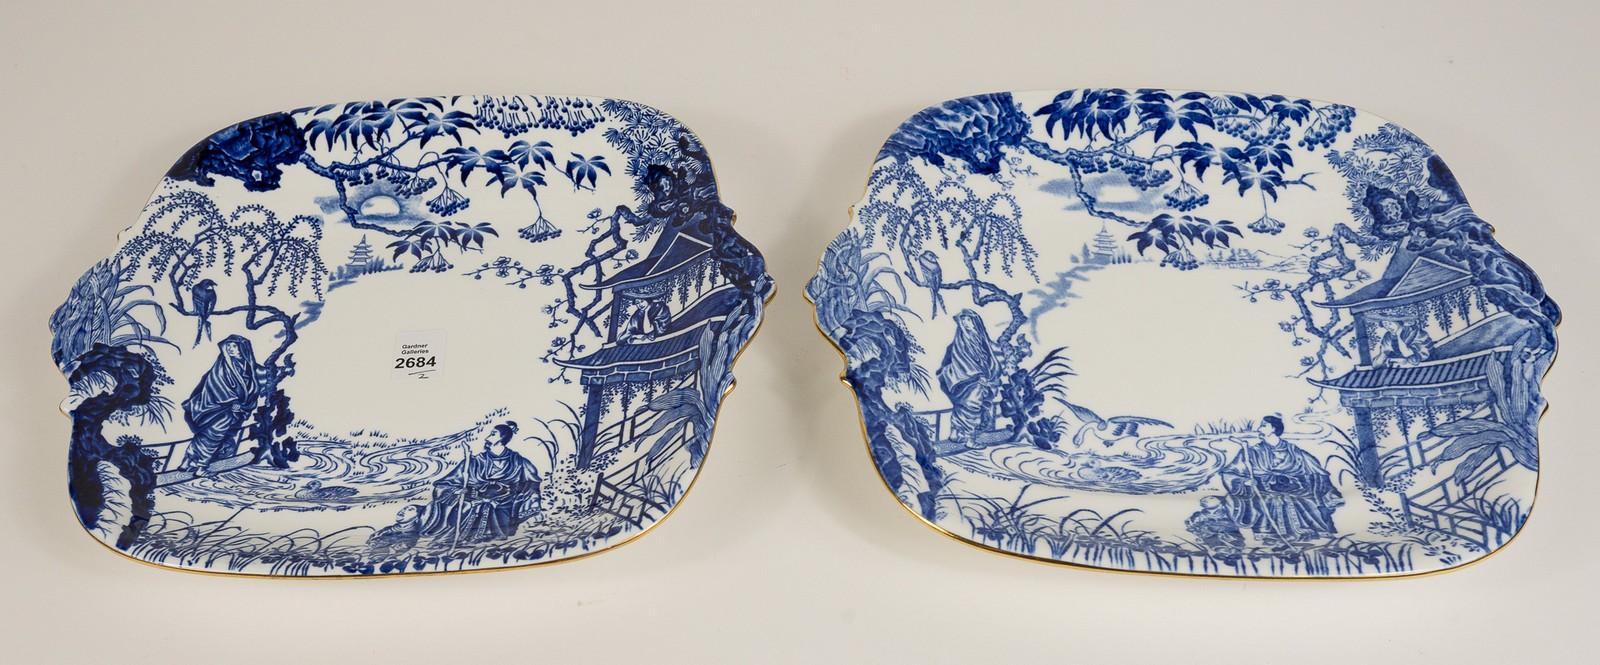 PAIR DERBY SERVING TRAYS